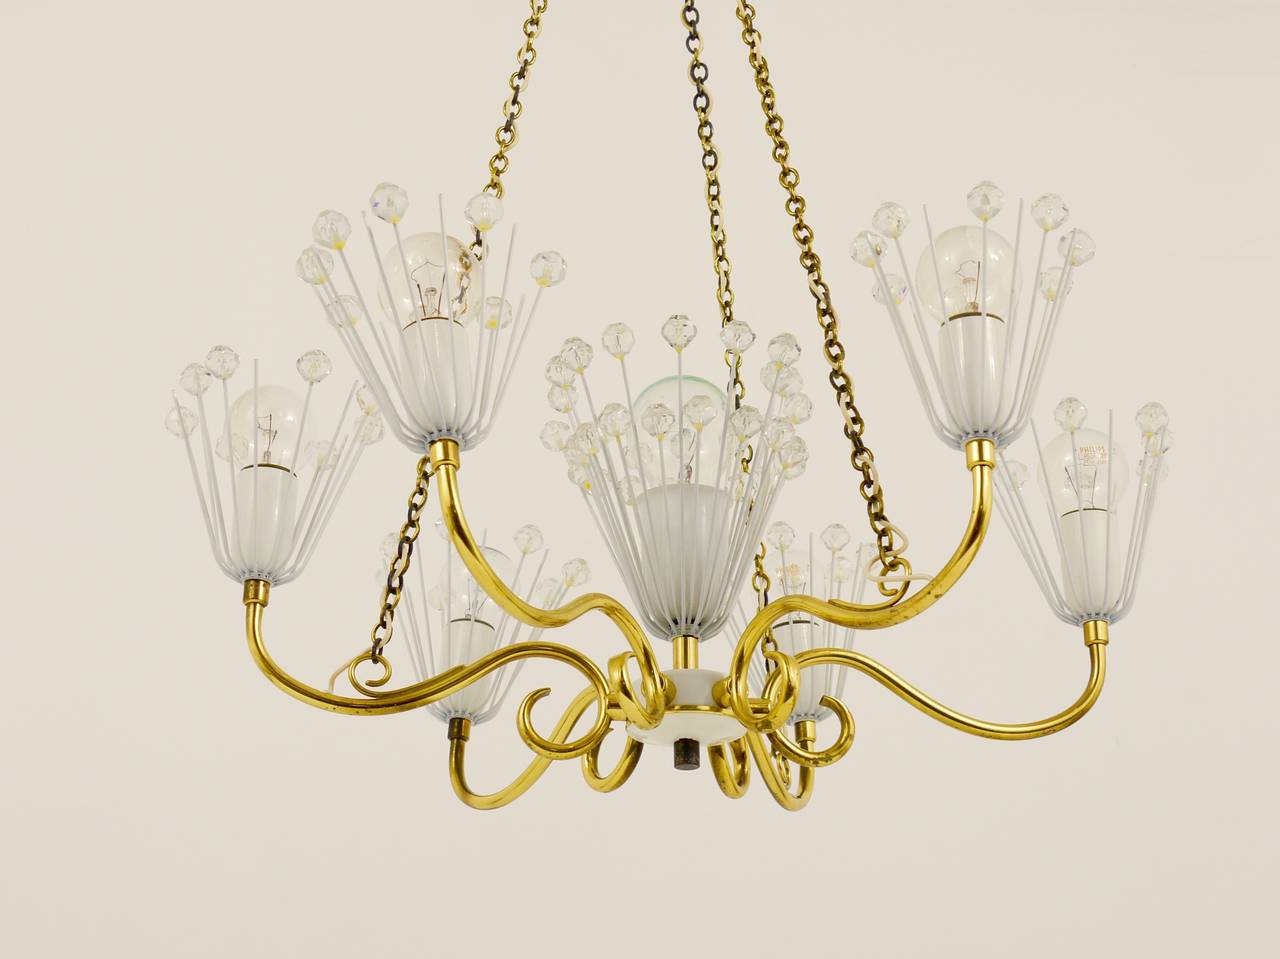 A wonderful Austrian brass chandelier with 6 arms, designed by Emil Stejnar, executed by Rupert Nikoll in the 1950s. In very good condition. 

Measurements: diameter 20 in, total height 24 in;, height without chains: 8 in.